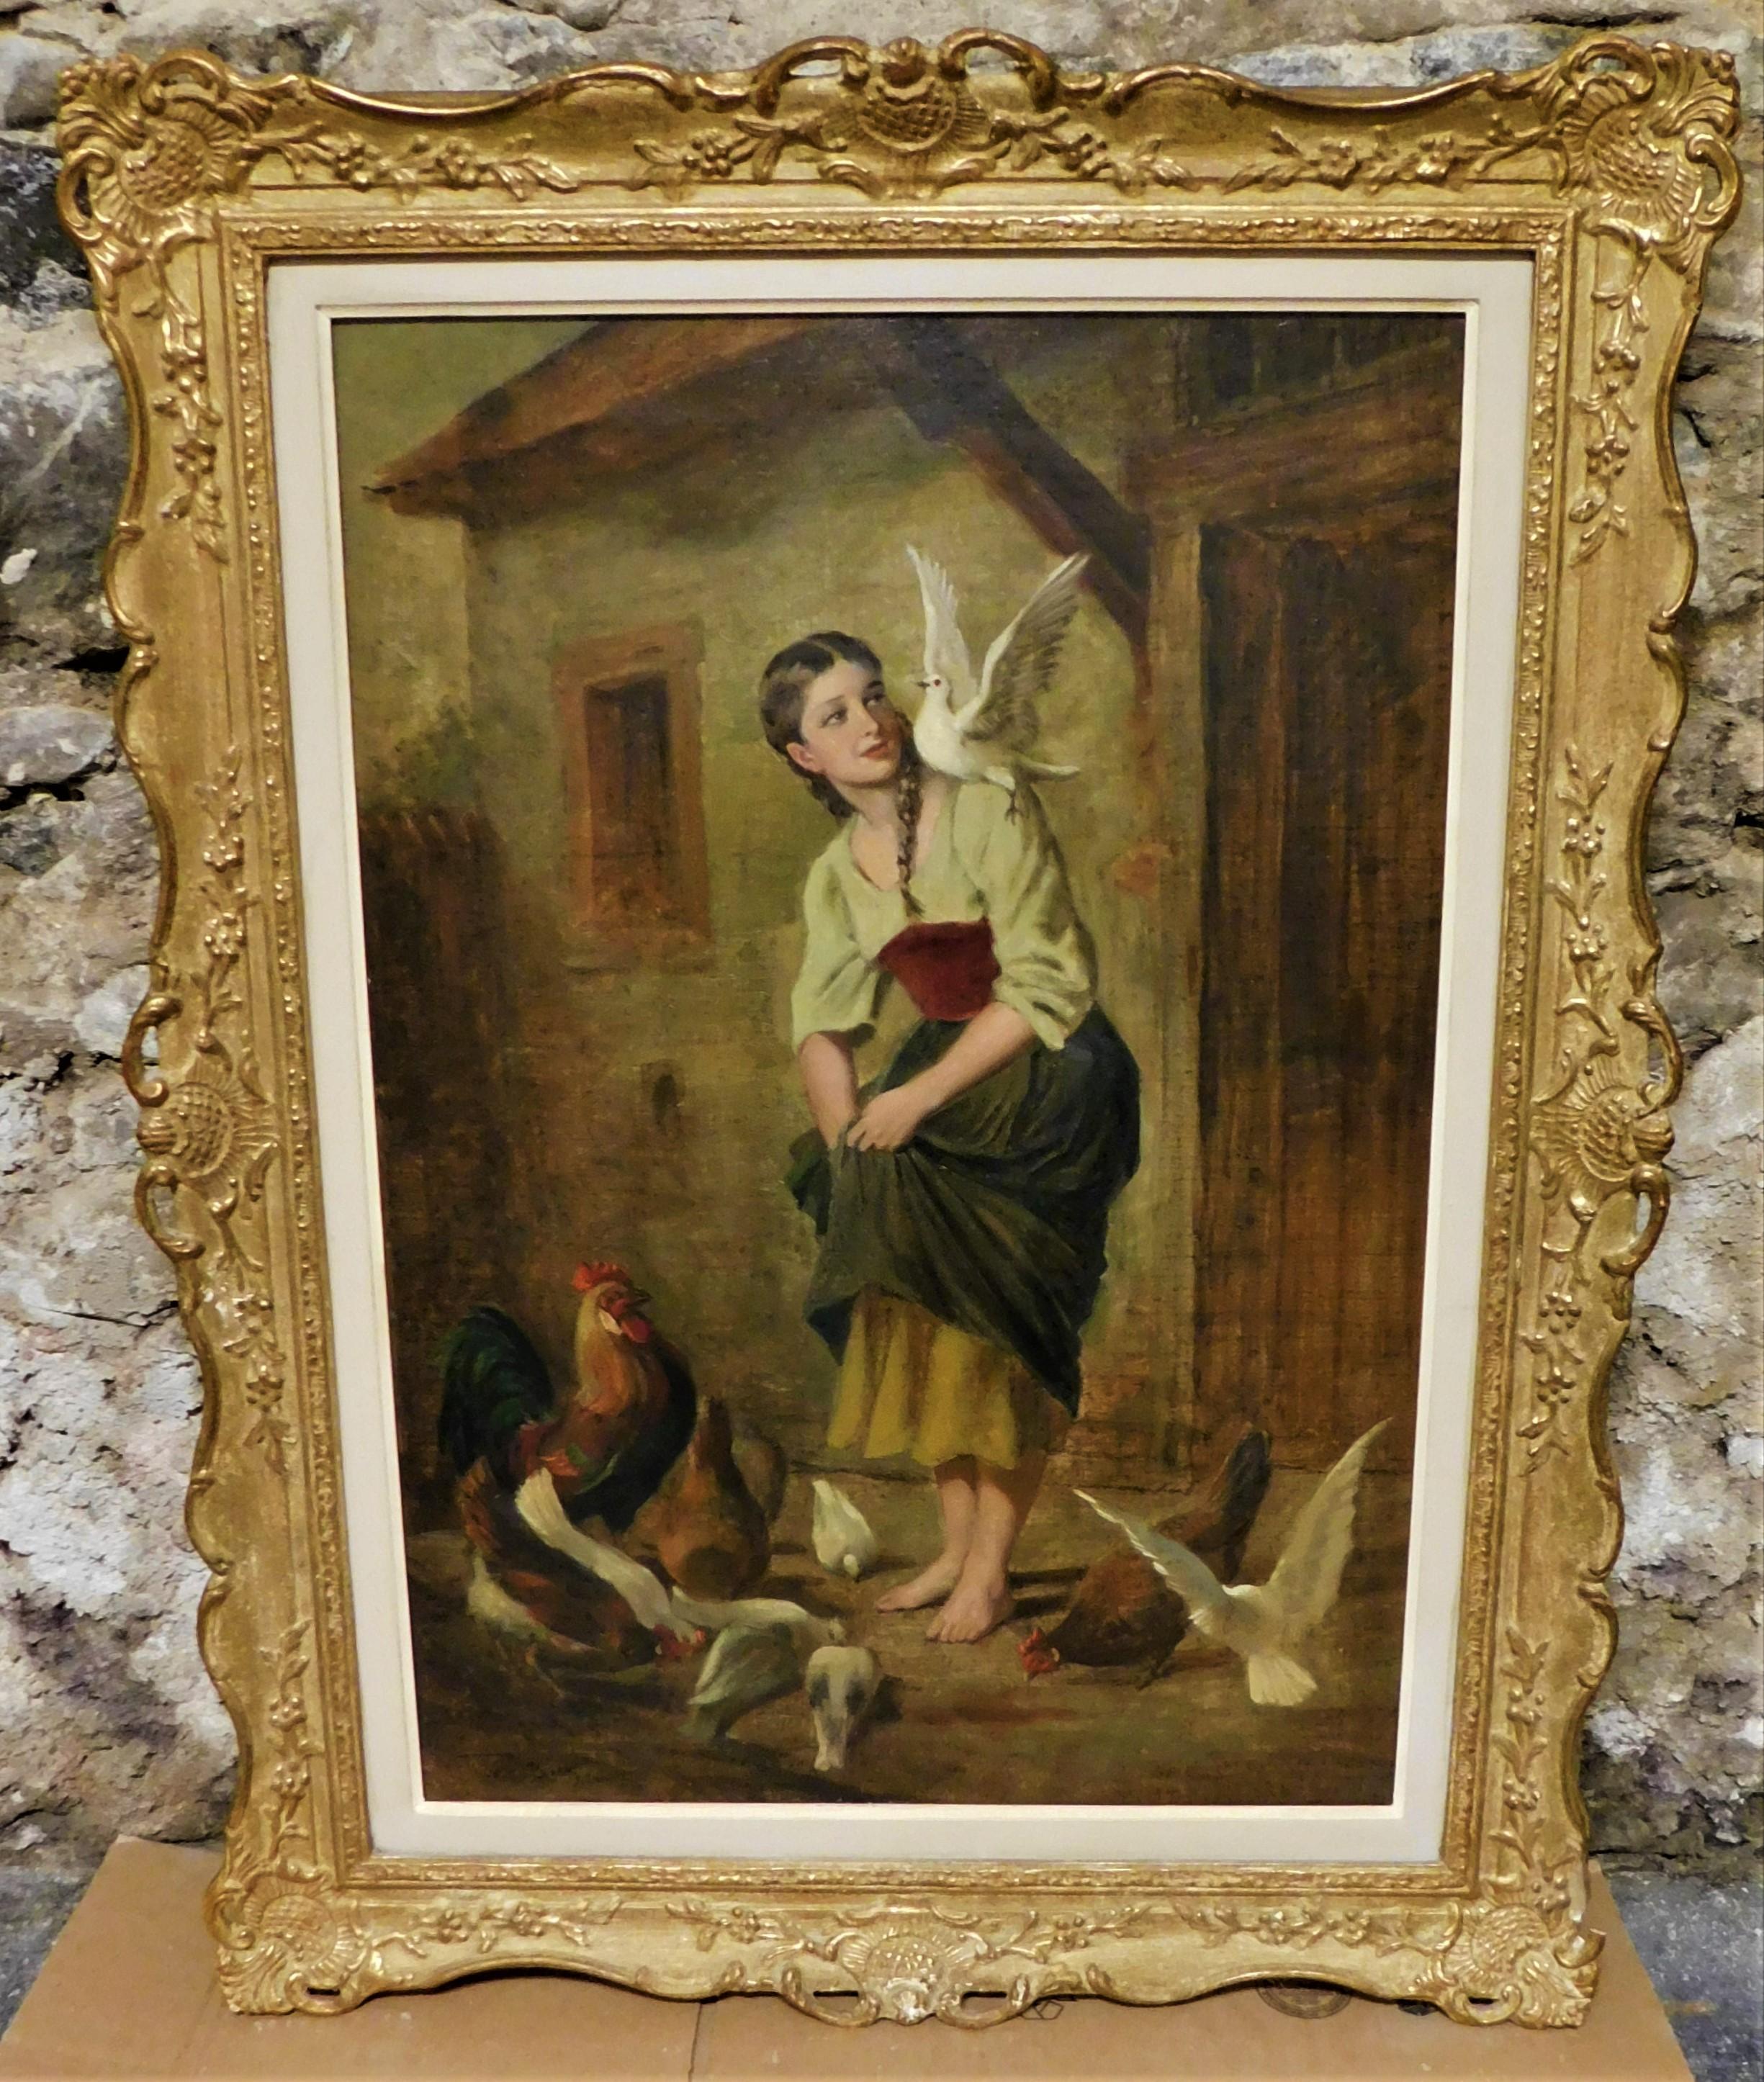 German artist Theodor von der Beek (1838-1921), circa 1880s oil on canvas painting in an ornate gold frame.
Actual painting size is 28.5 inches high by 20 inches wide by 1 inch deep. 

Theodor von der Beek (born March 21, 1838 in Kaiserswerth , died